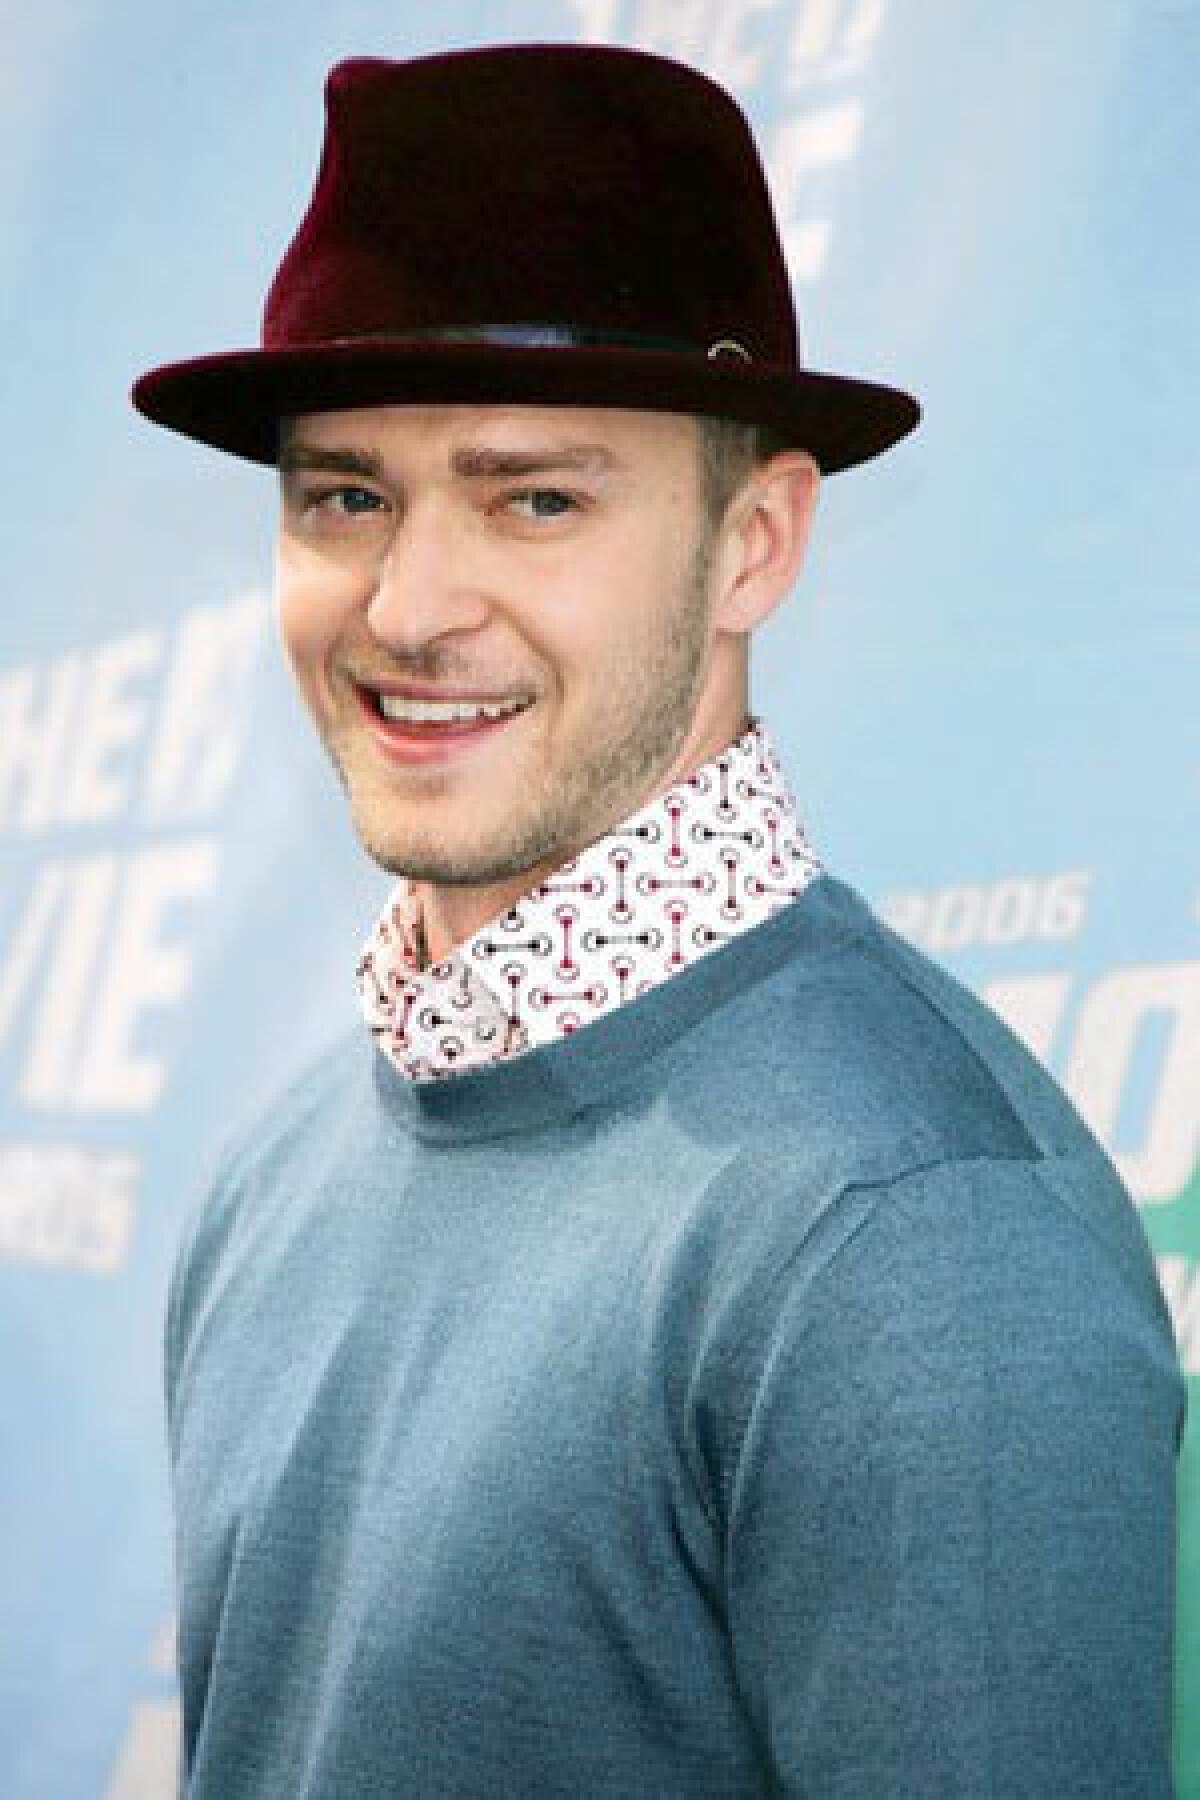 Fedora-sporting stars such as Justin Timberlake wear their chapeaus with a dose of retro swagger.